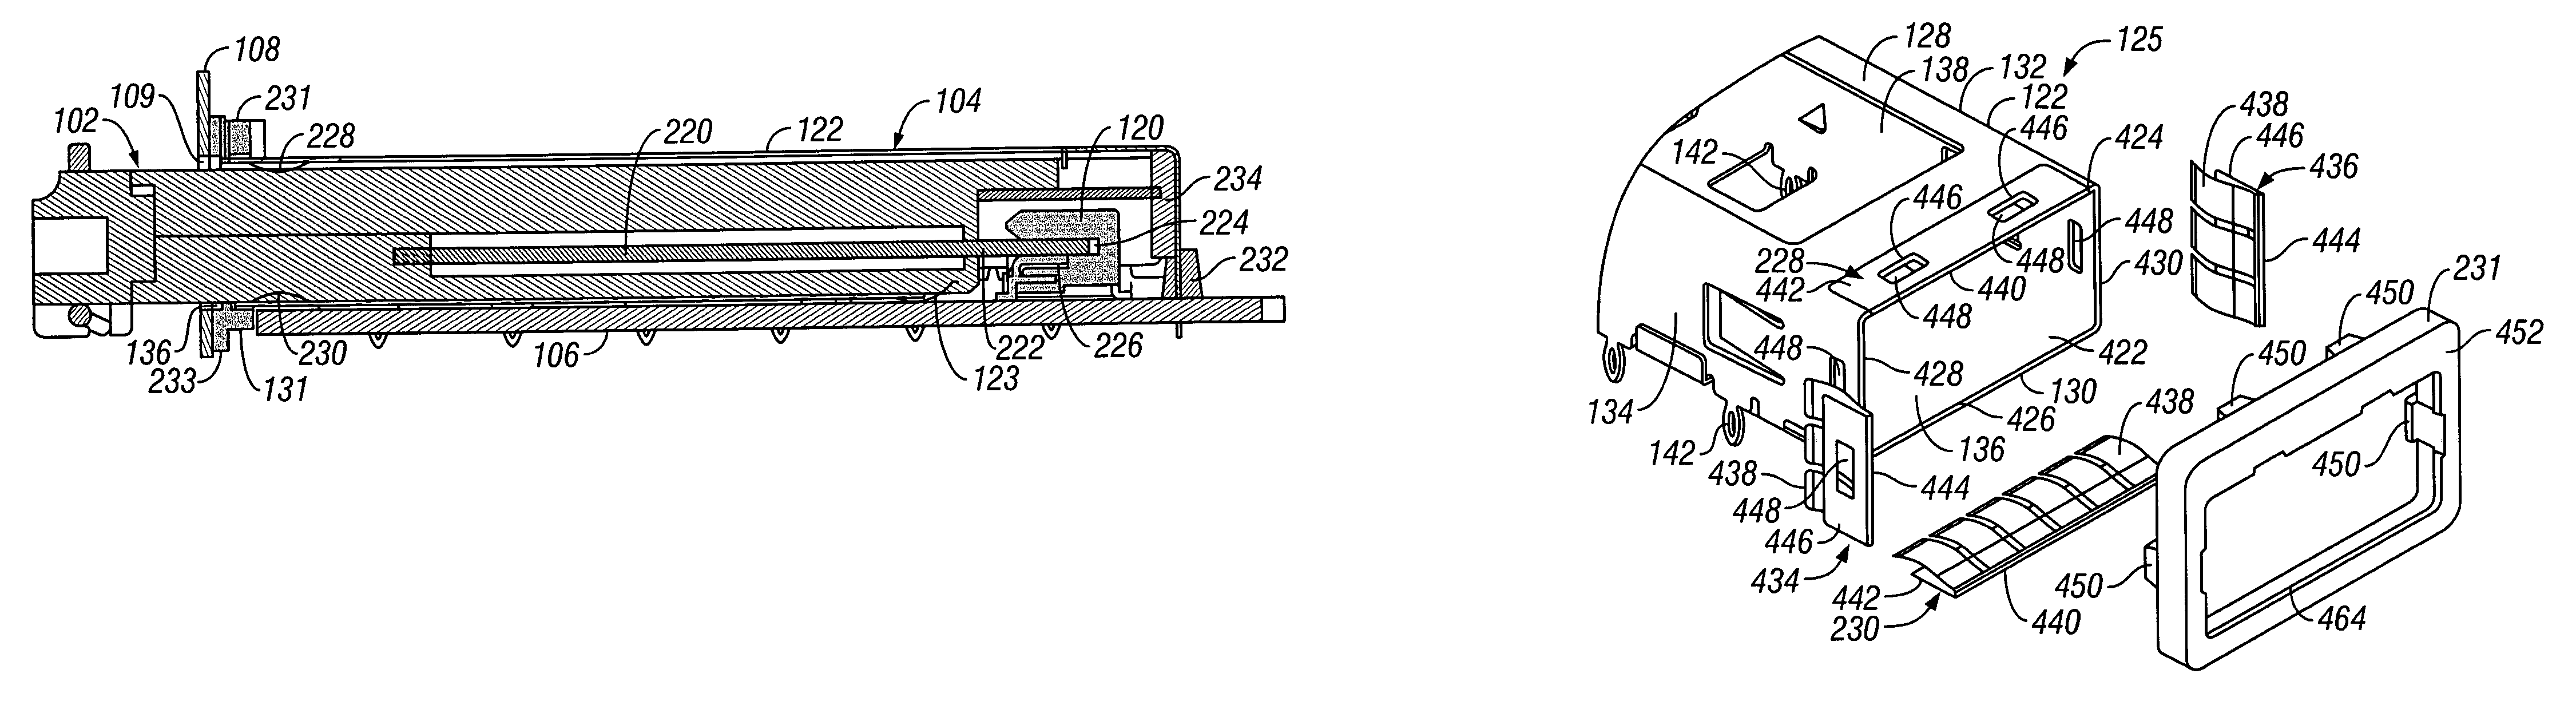 Receptacle assembly having shielded interface with pluggable electronic module